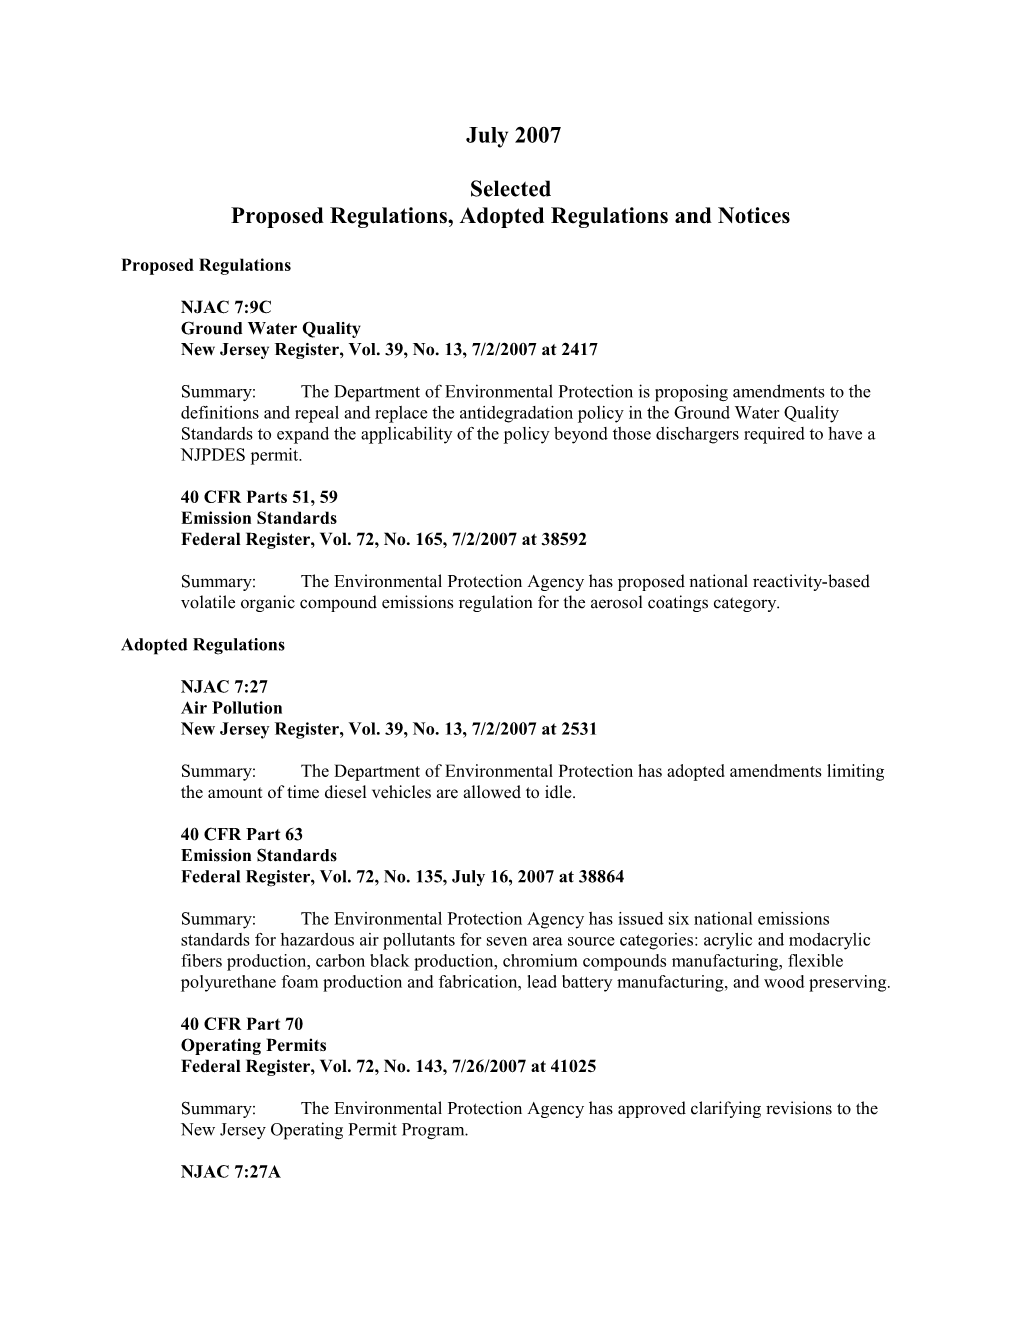 Proposed Regulations, Adopted Regulations and Notices